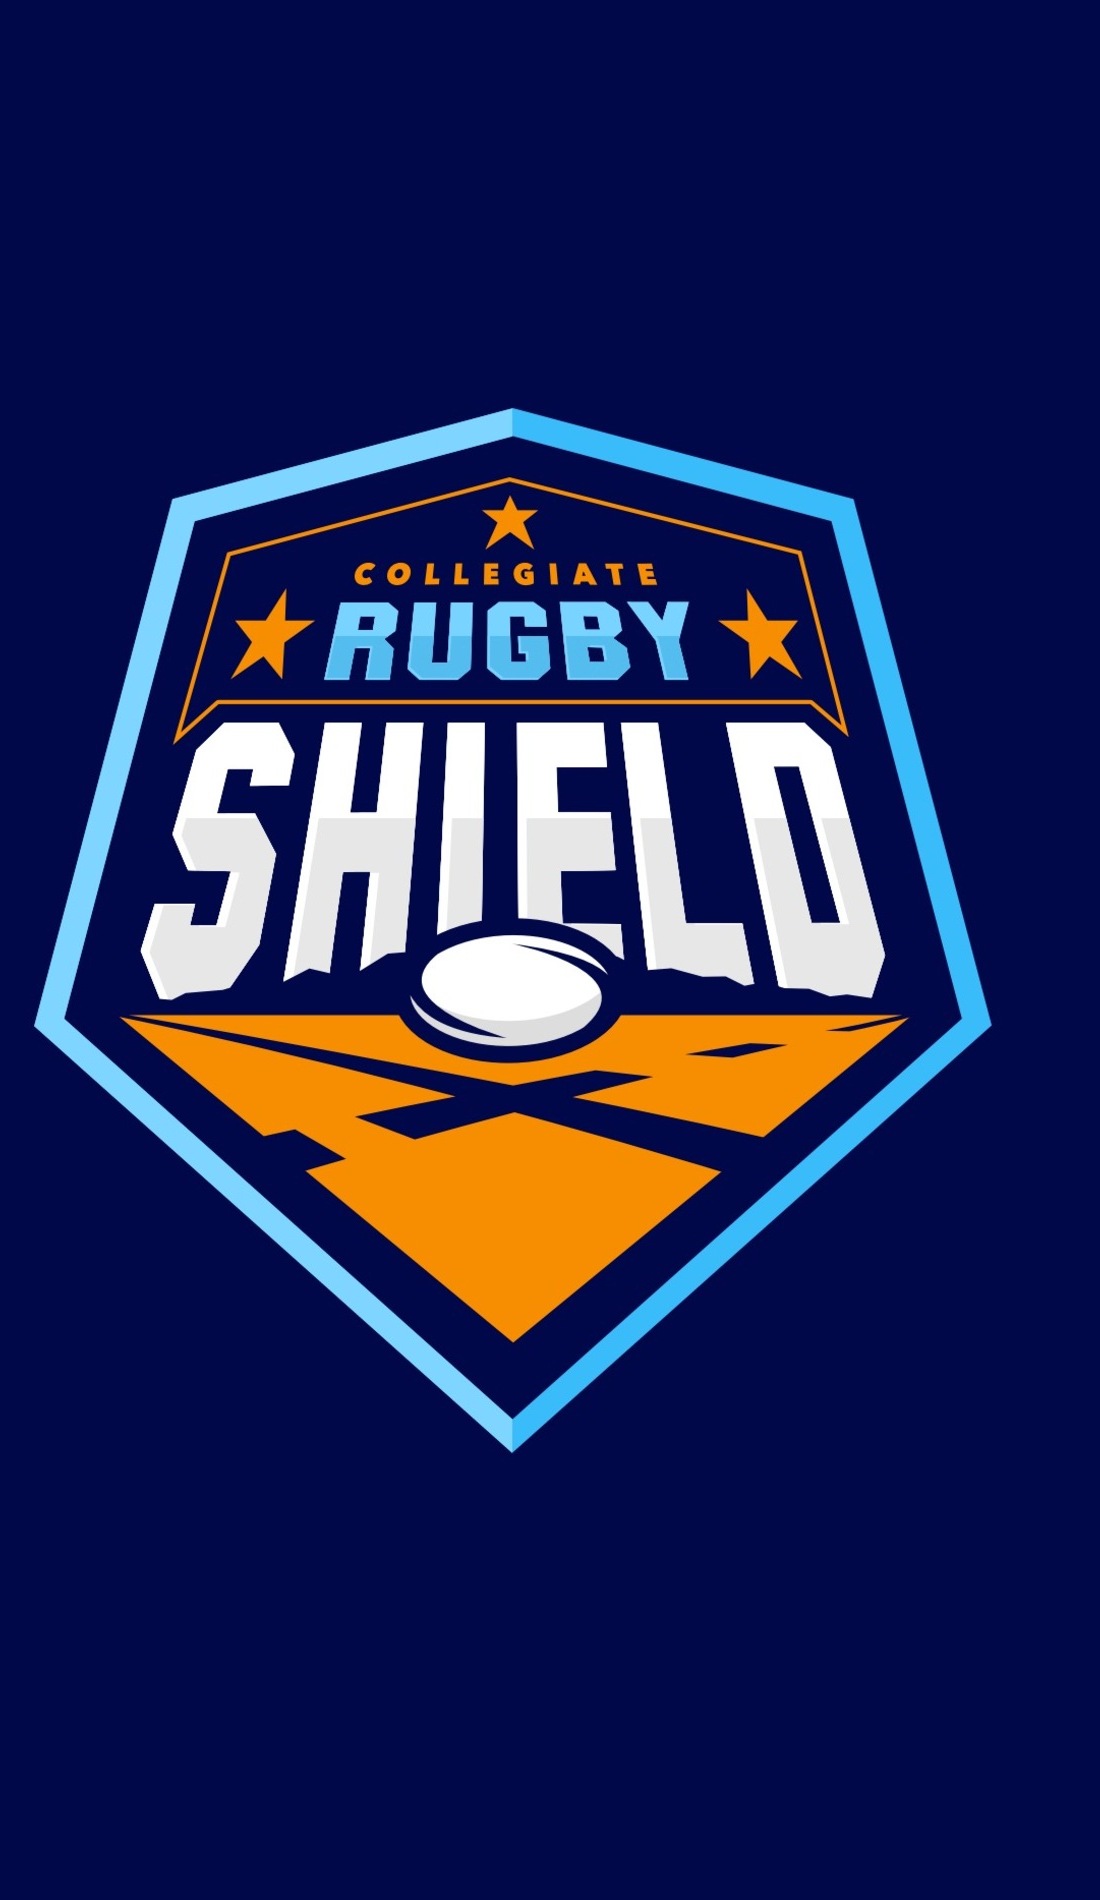 A USA National Rugby live event